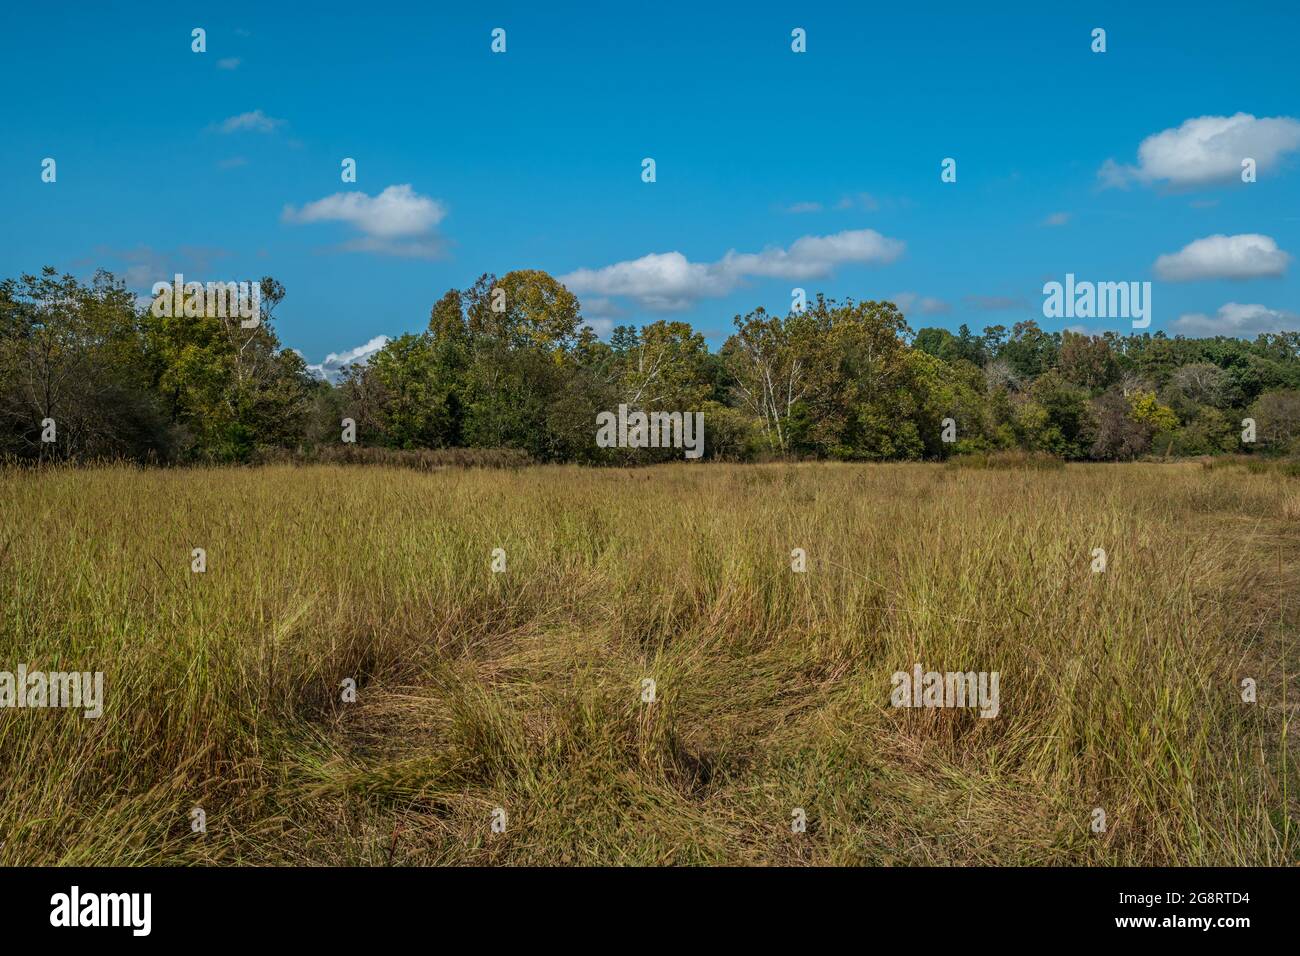 A field full of tall mature grasses golden color with seeds with the colorful woodlands in the background on a sunny warm day in autumn Stock Photo